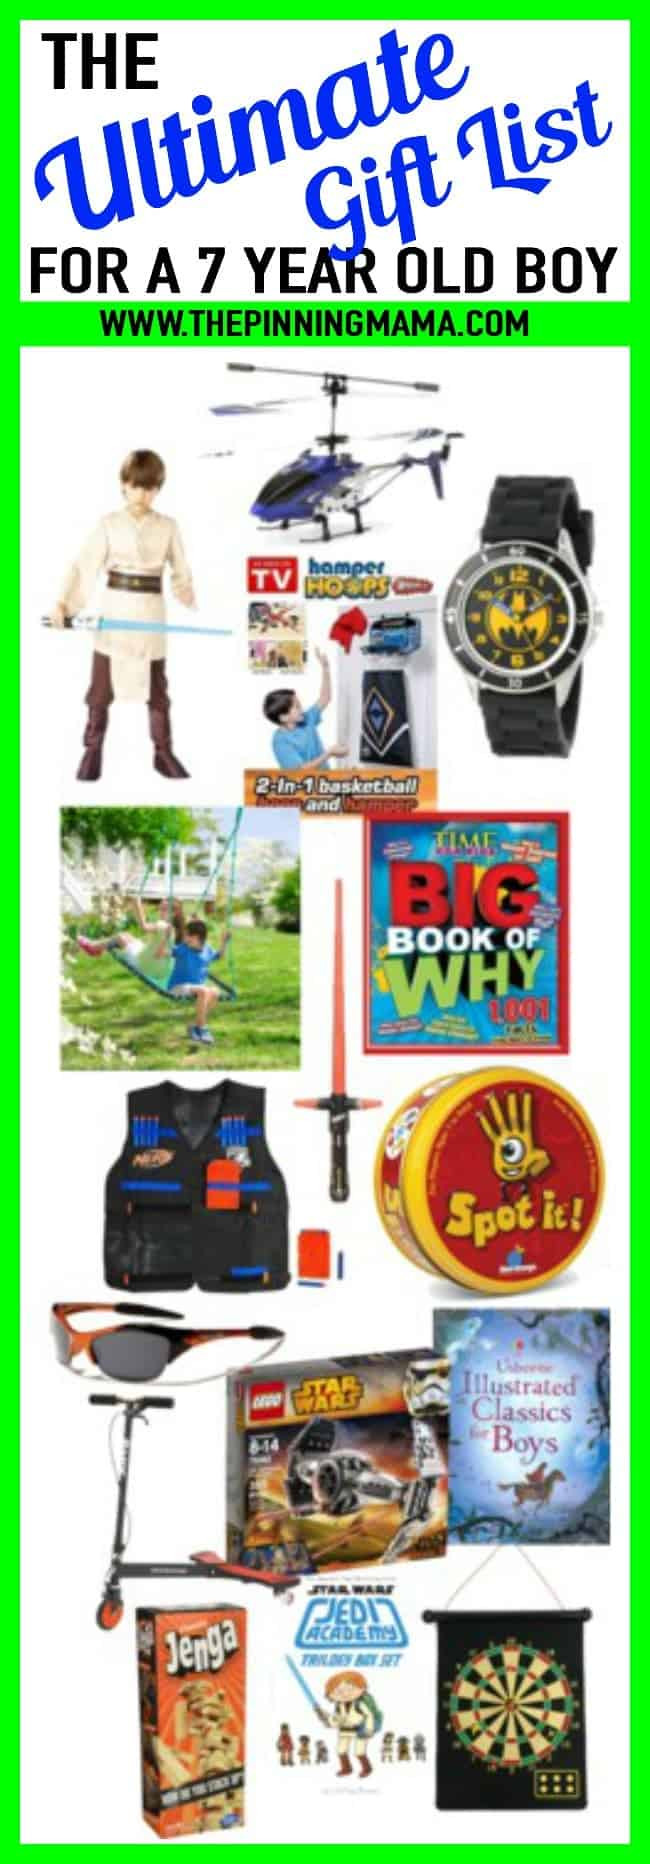 Gift Ideas For 7 Year Old Boys
 BEST Gift Ideas for a 7 Year Old Boy • The Pinning Mama